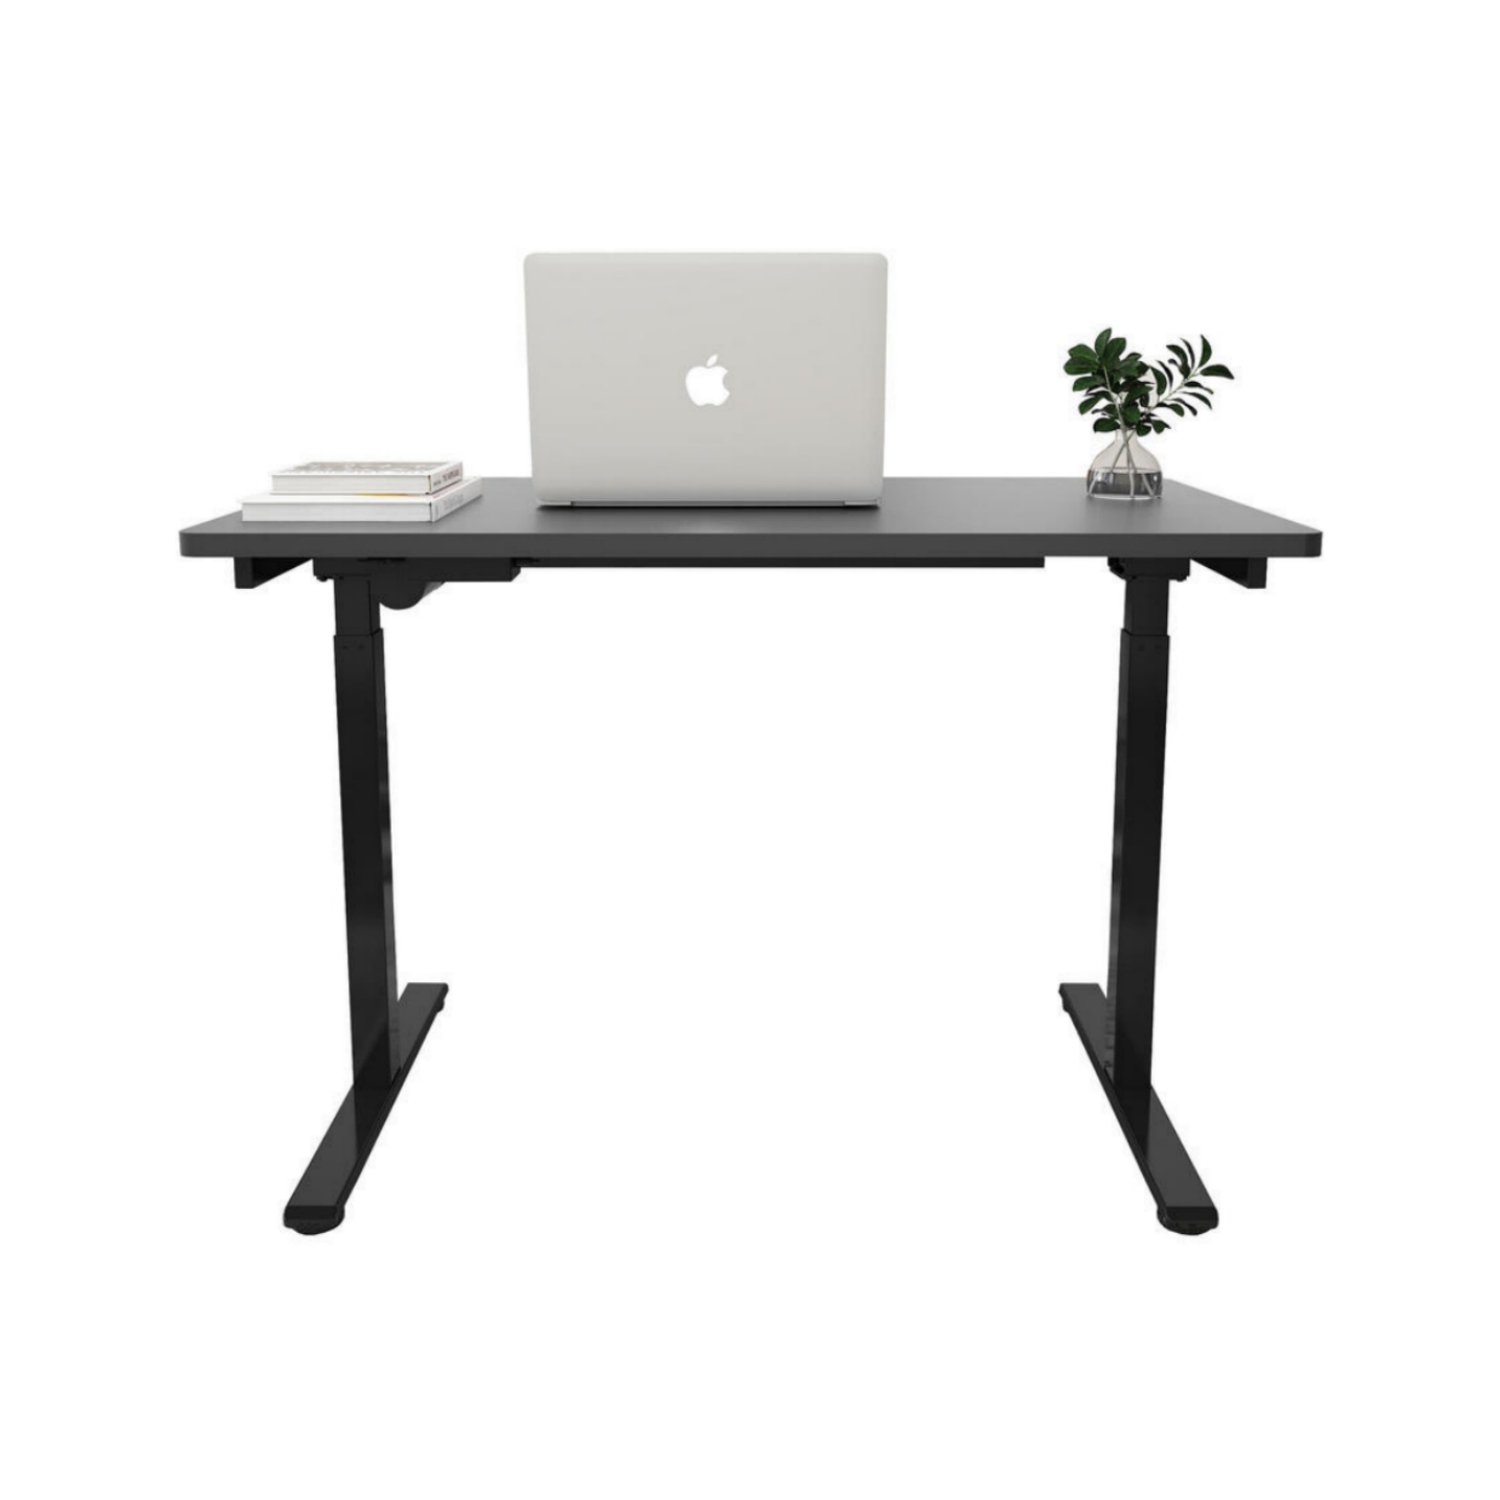 Black Height Adjustable Standing Desk Frame, Electric Sit Stand Desk Frame 2 Stage Single Motor for 38 to 53 inch Table Tops (Not Included)